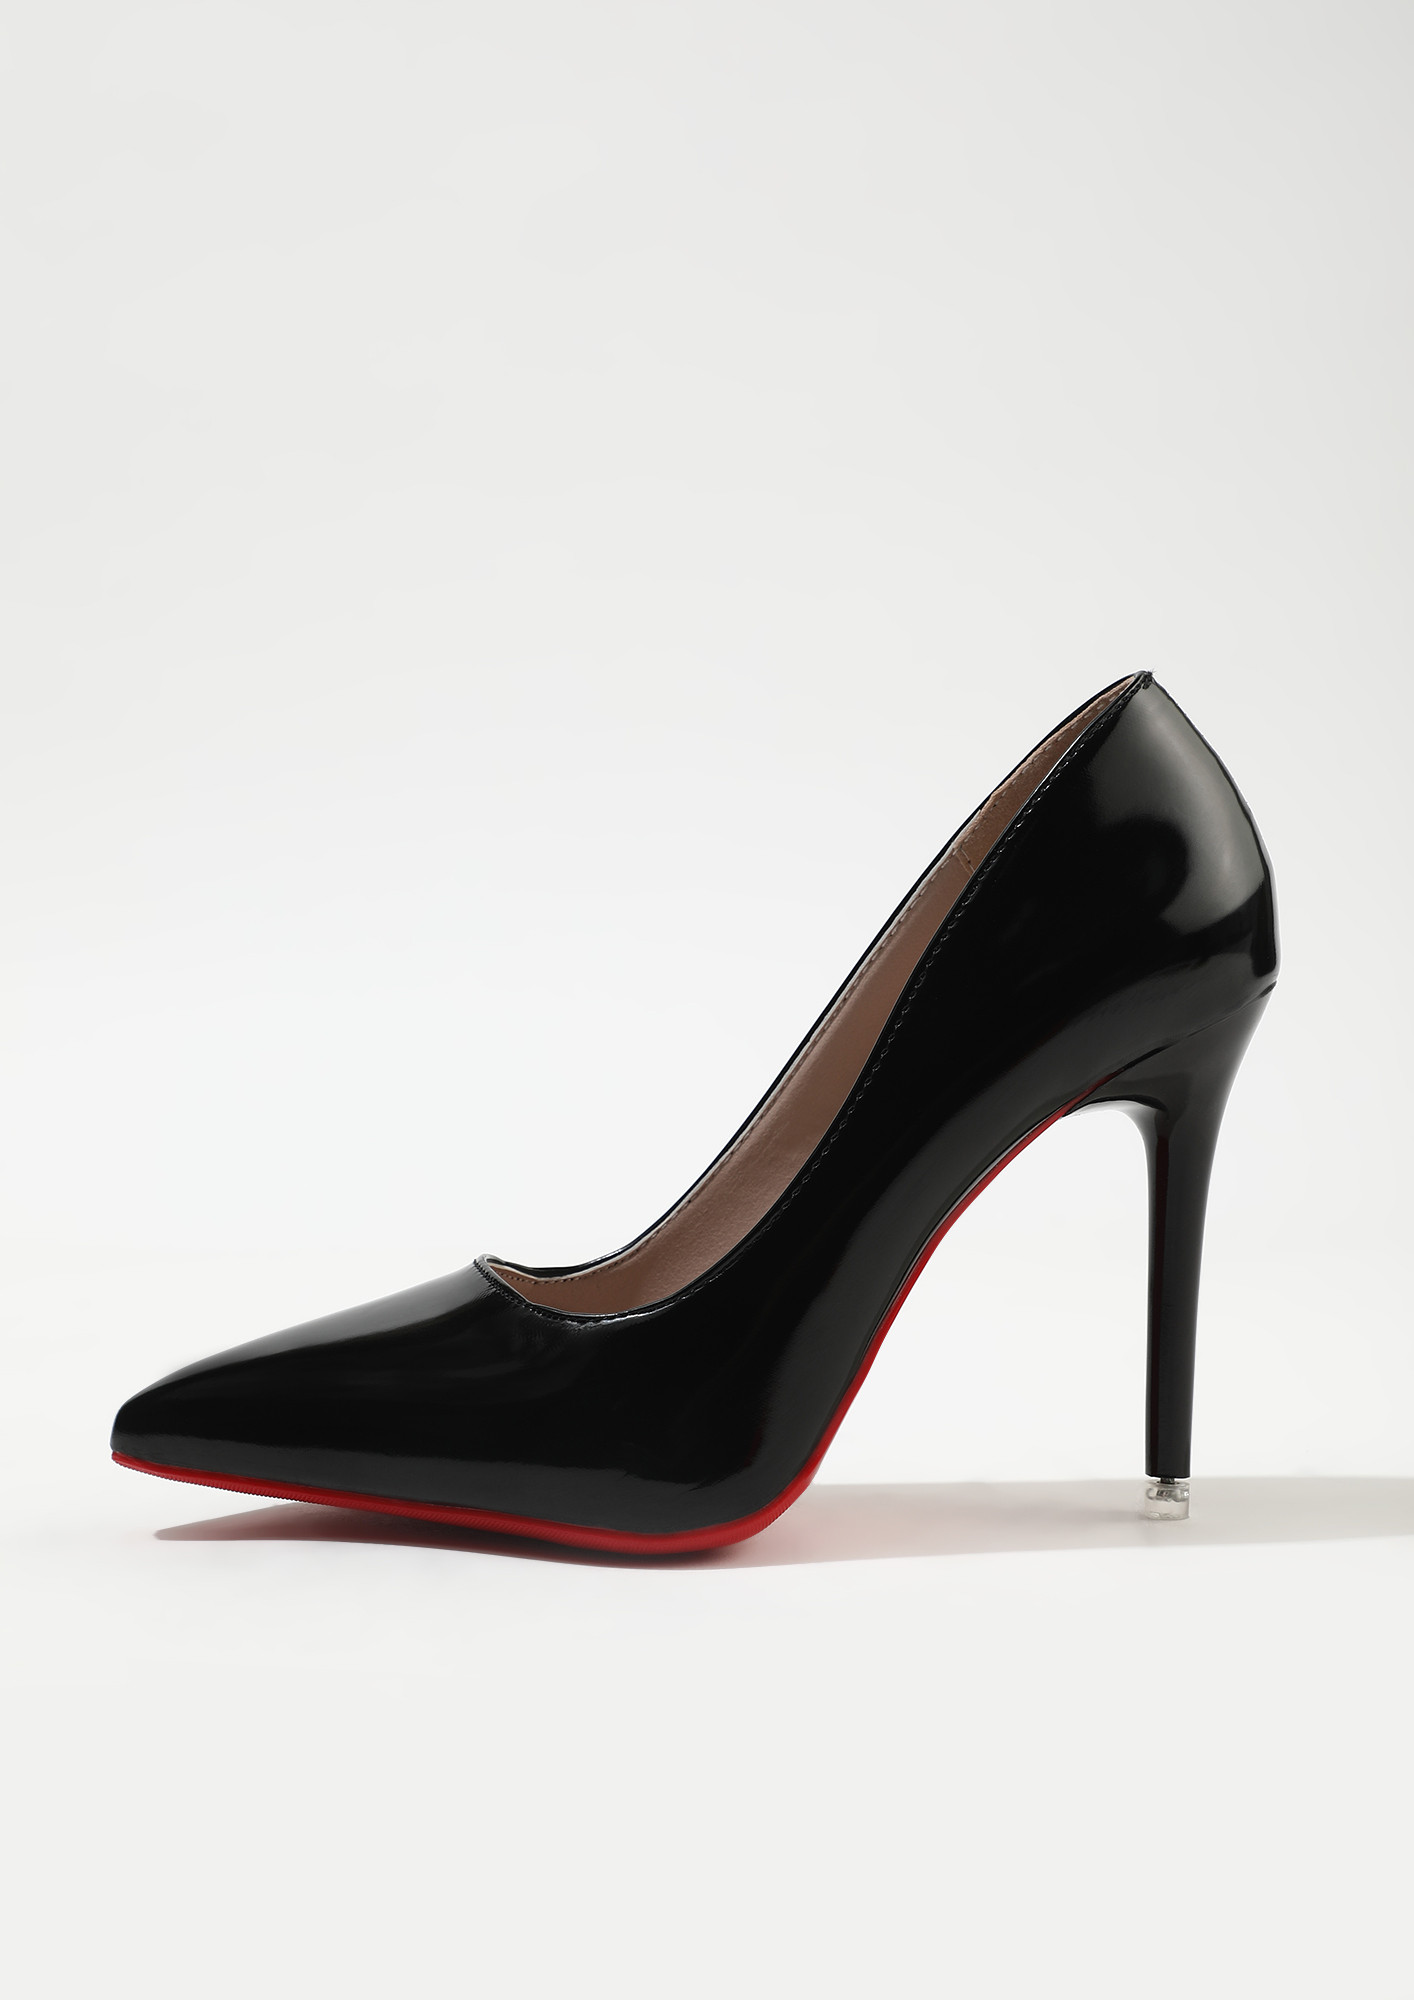 Red and black pump shoes stock photo. Image of leather - 108824544